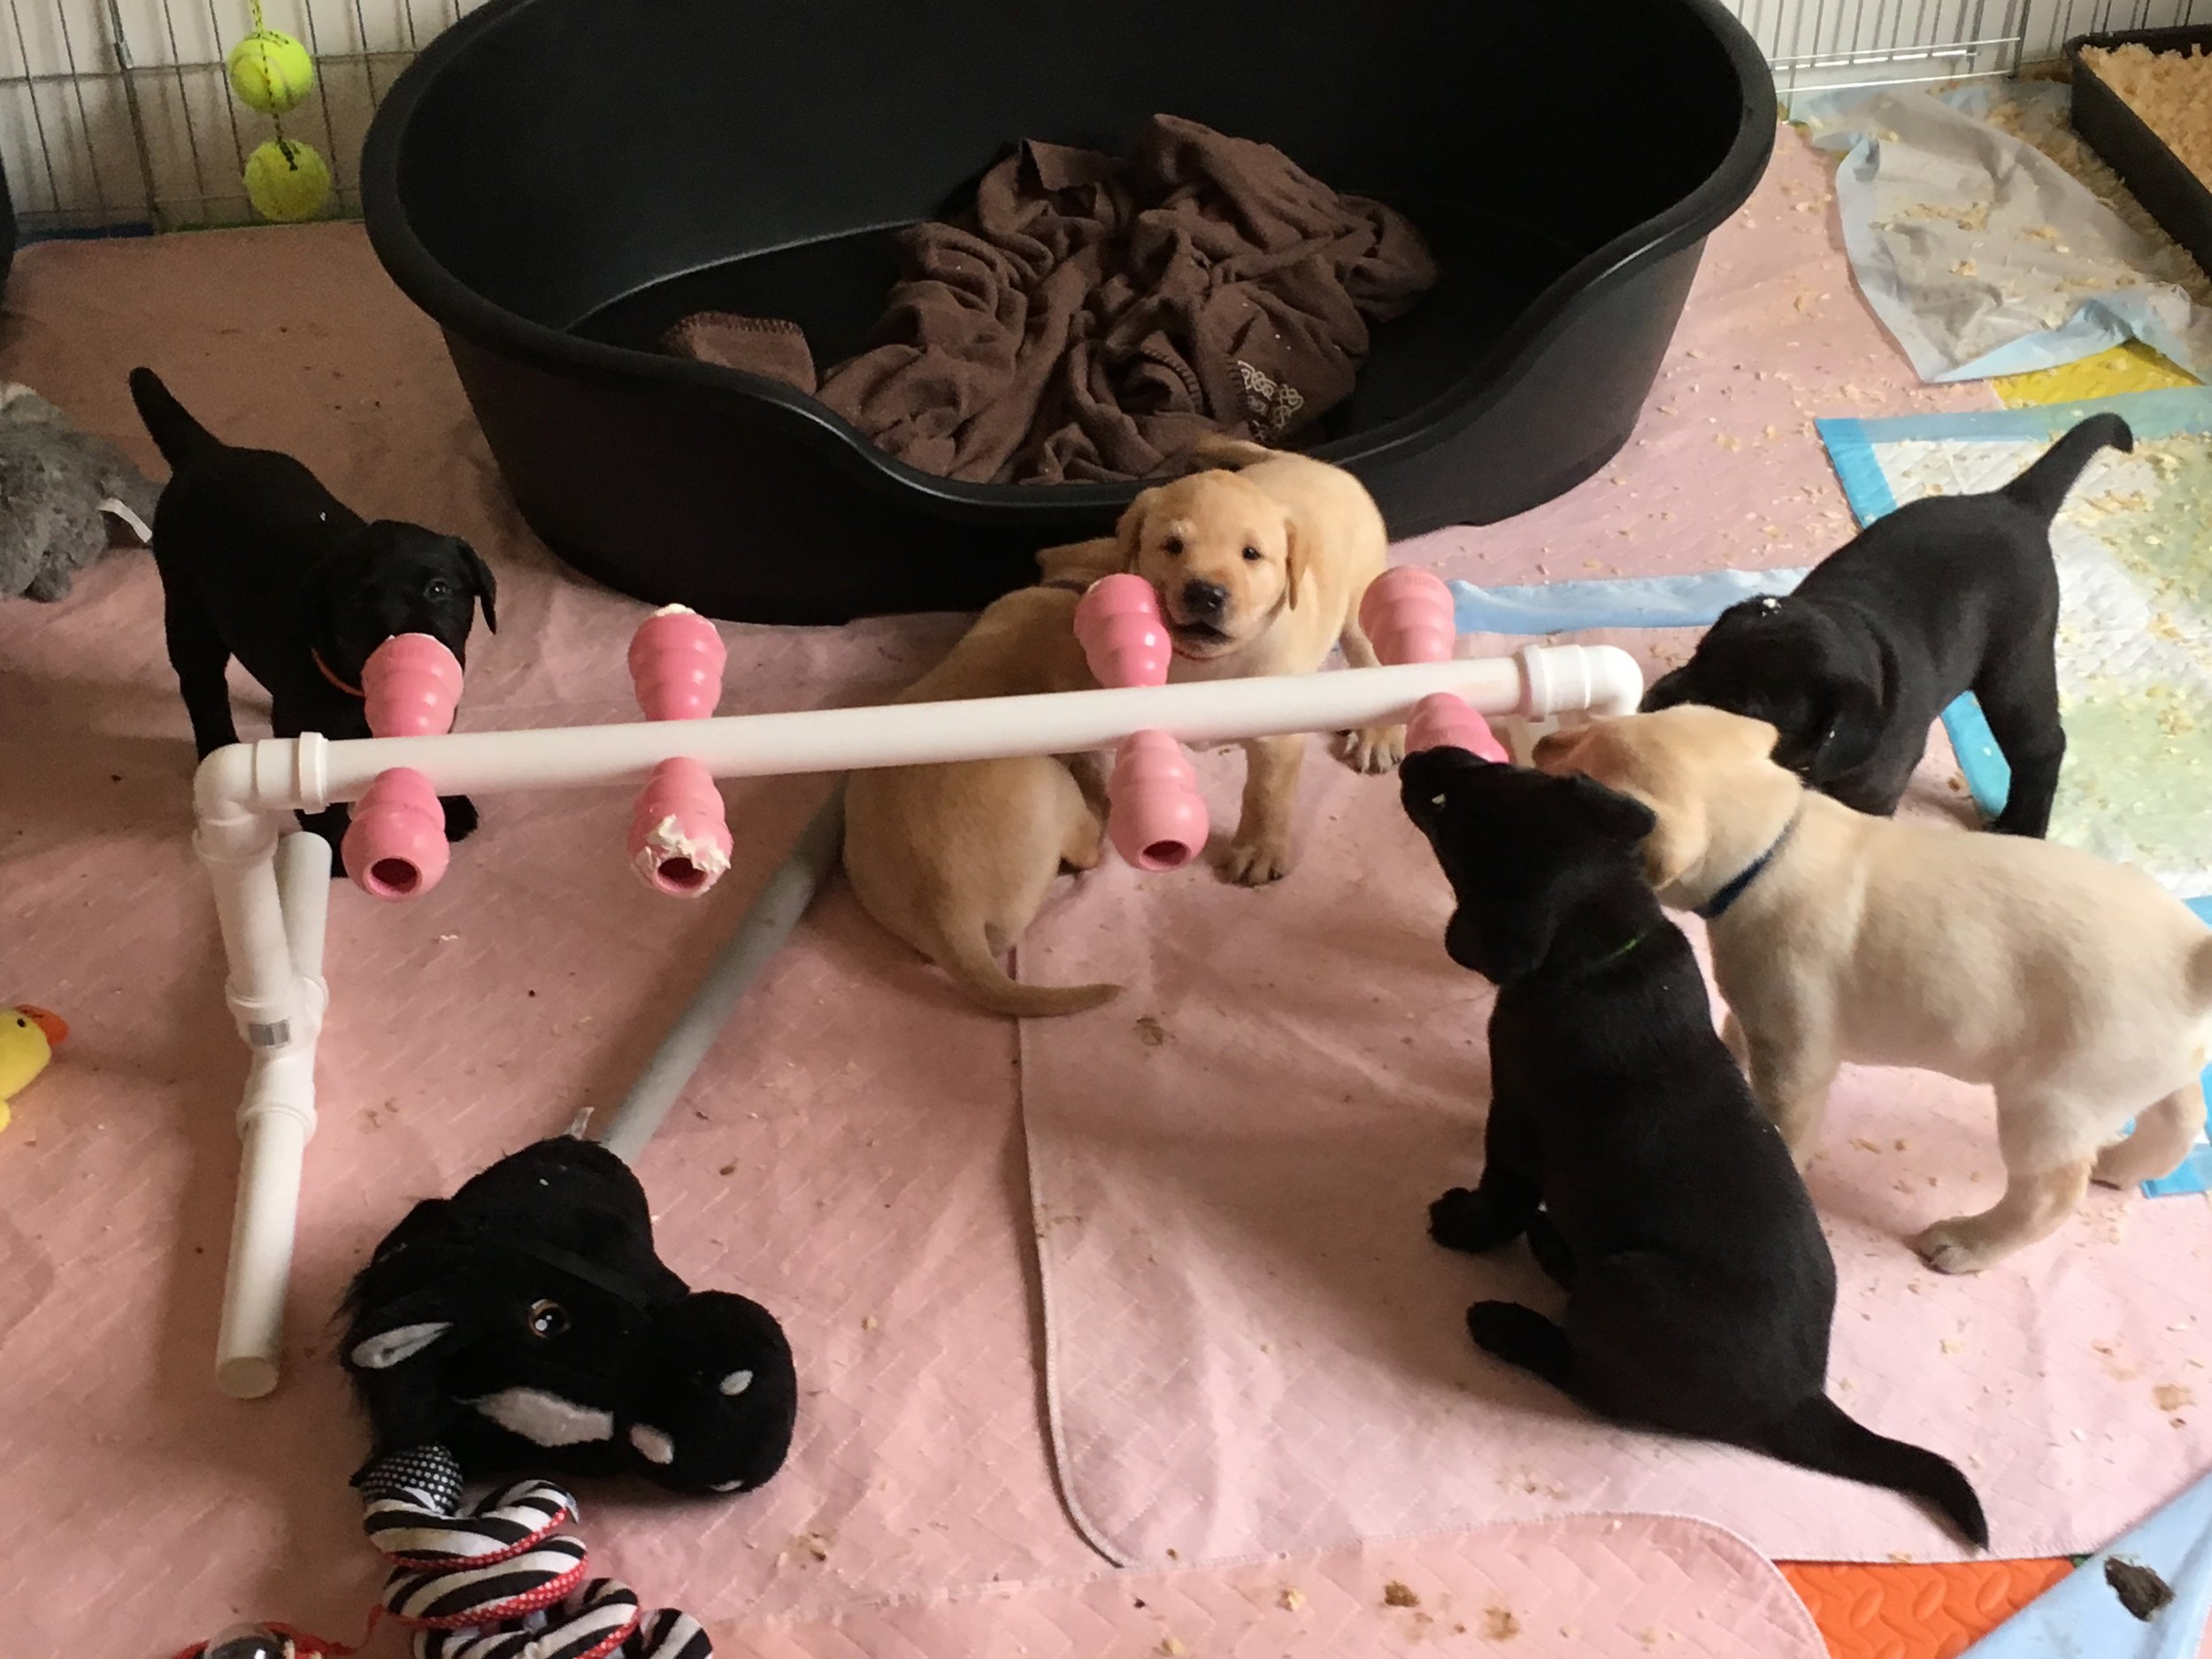 INTRODUCTION TO KONGS AND CHEW TOYS